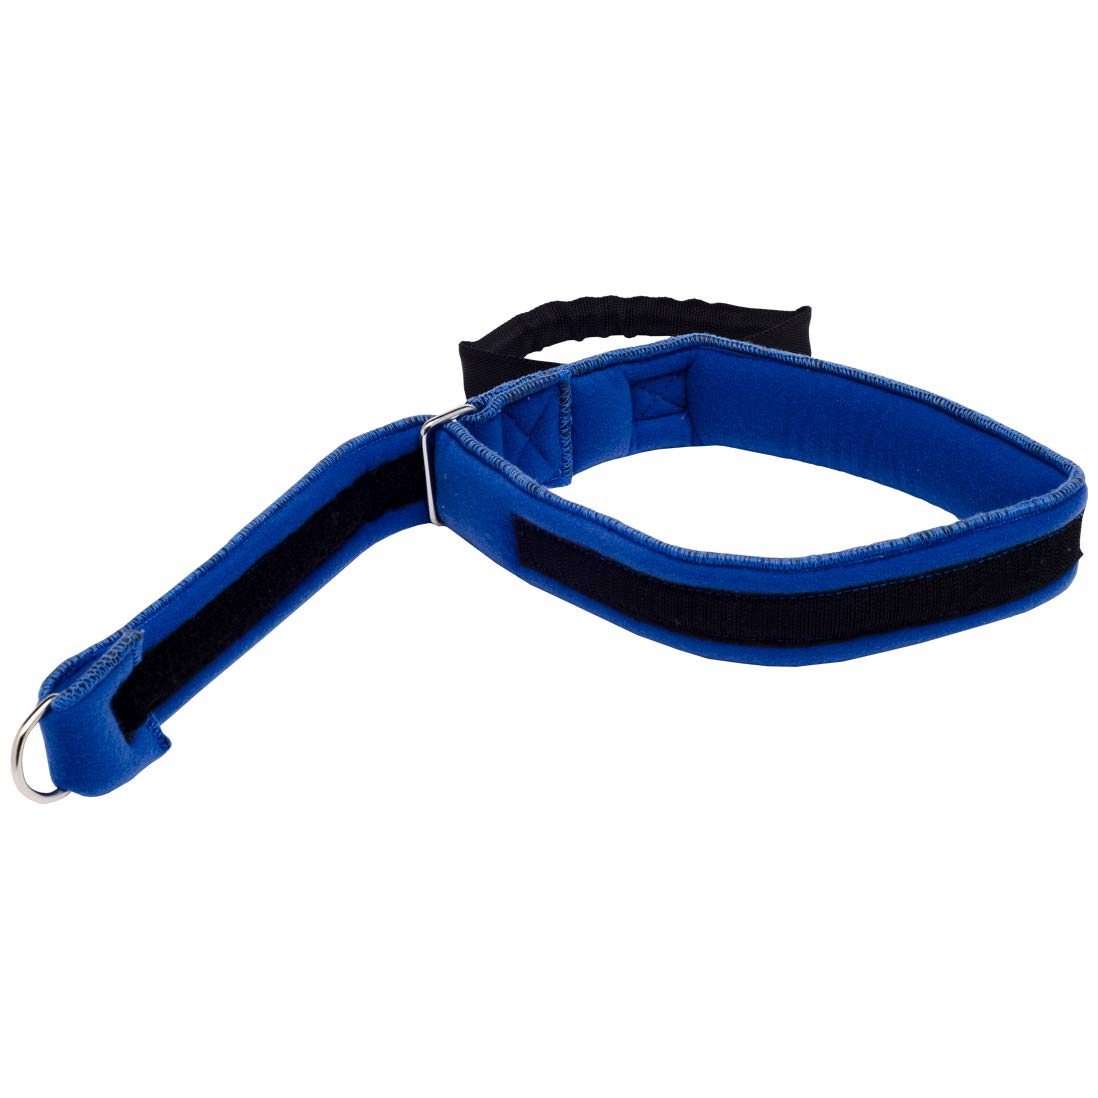  Hoomtree Leg Lifter Strap for Limited Mobility,Thigh